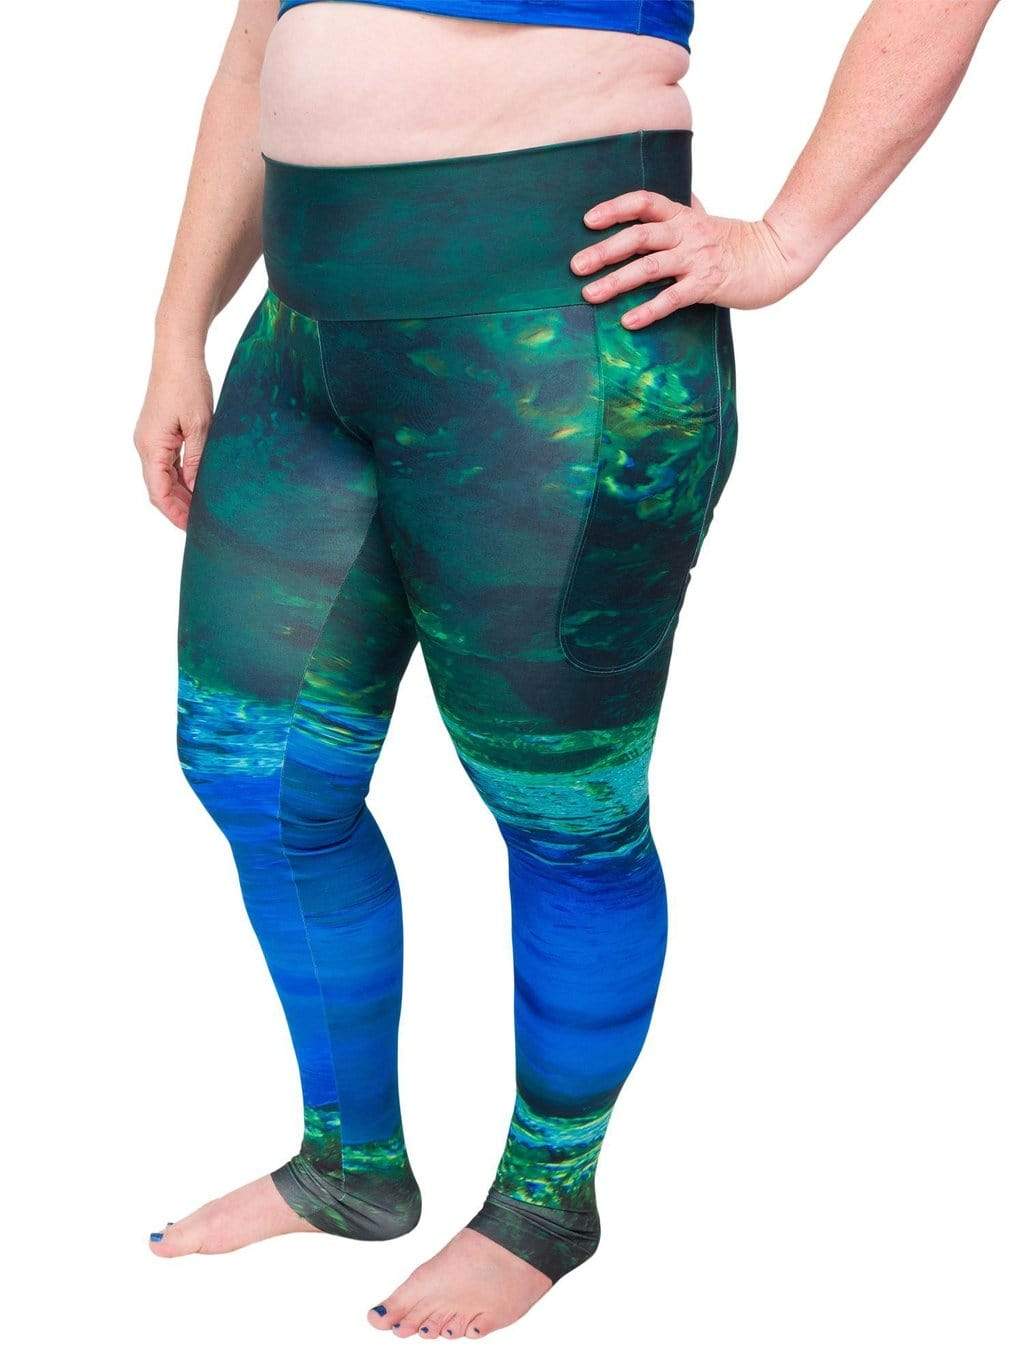 Model: Ruth volunteers for citizen science projects on both salt and freshwater fish and spends as much time as possible in, on, or under the water. She is 5&#39;7&quot;, 217 lbs and is wearing a 2XL.